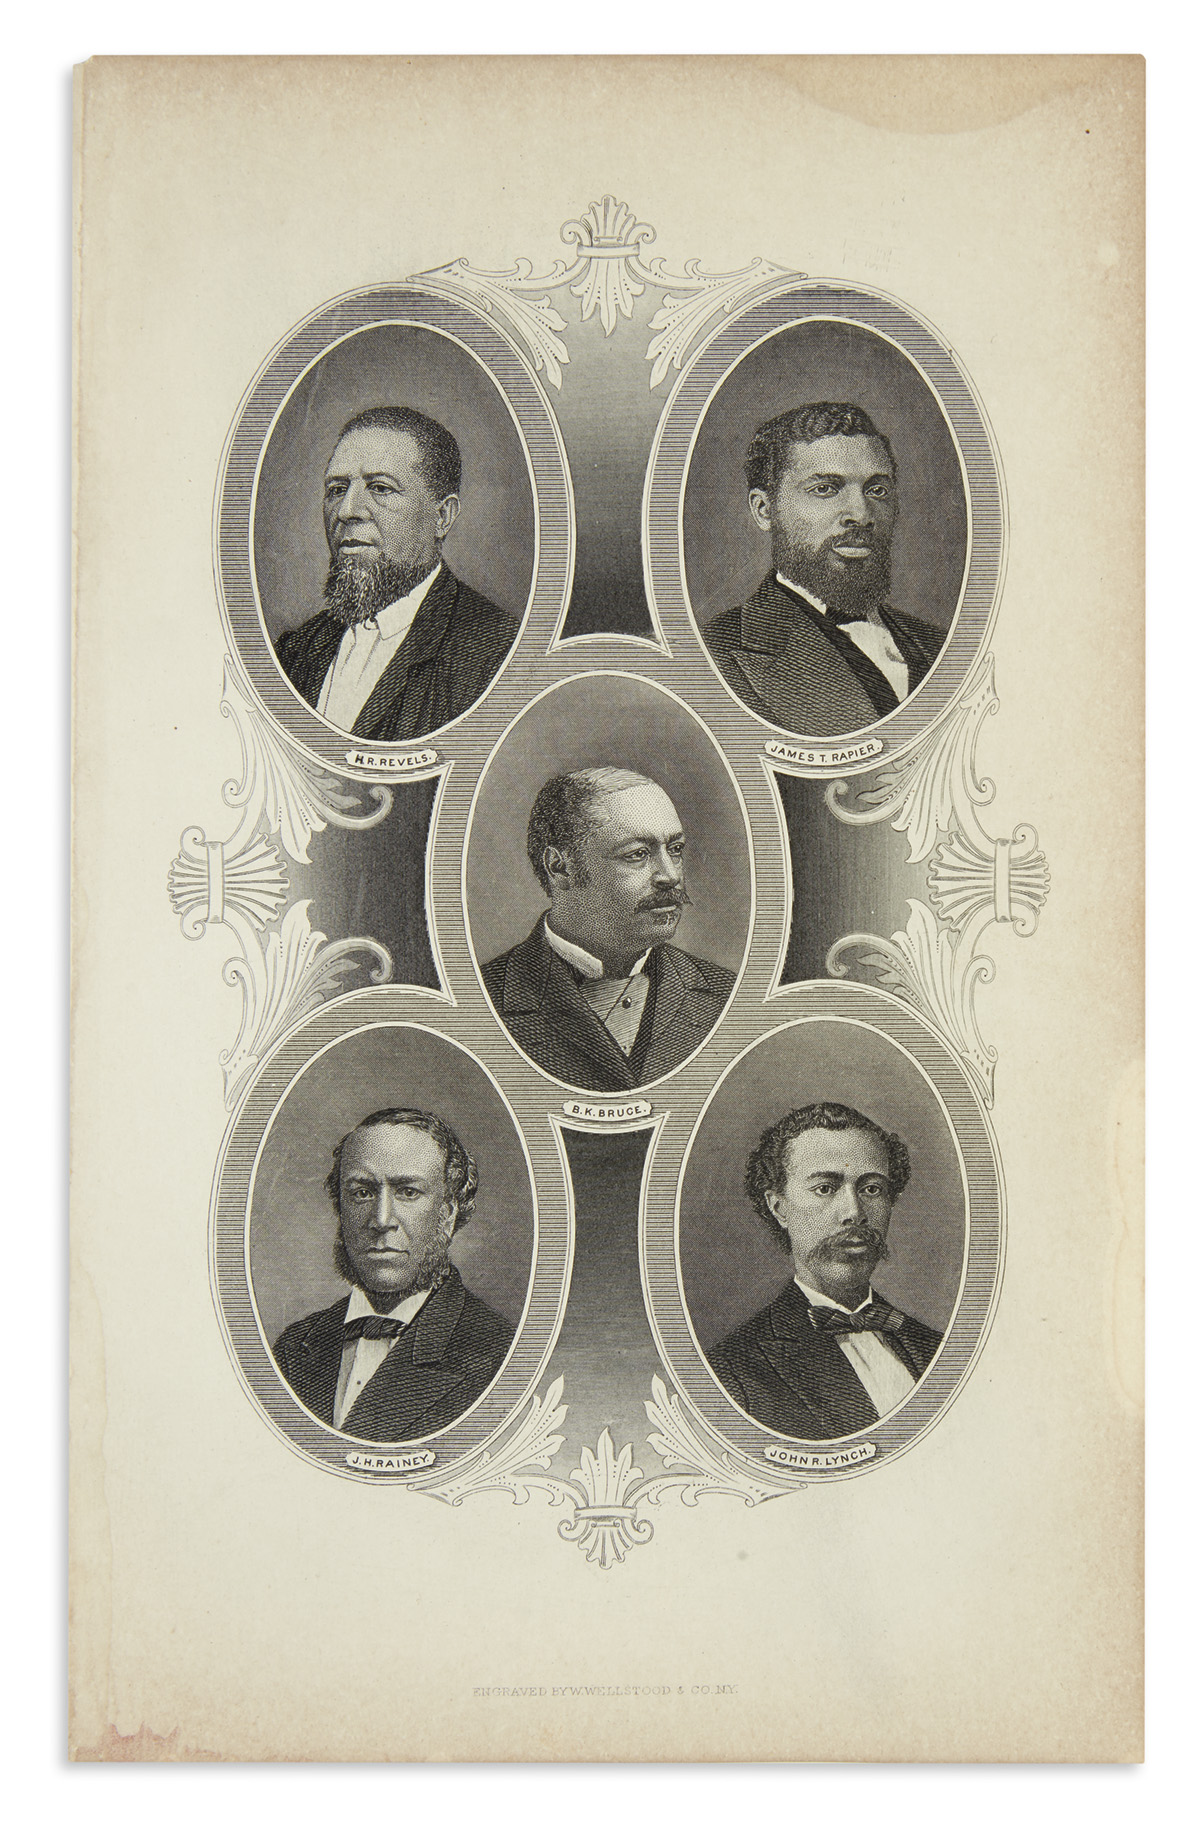 (RECONSTRUCTION.) [Wellstood, William, engraver]. Engraved portrait of African-American members of Reconstruction Congresses.